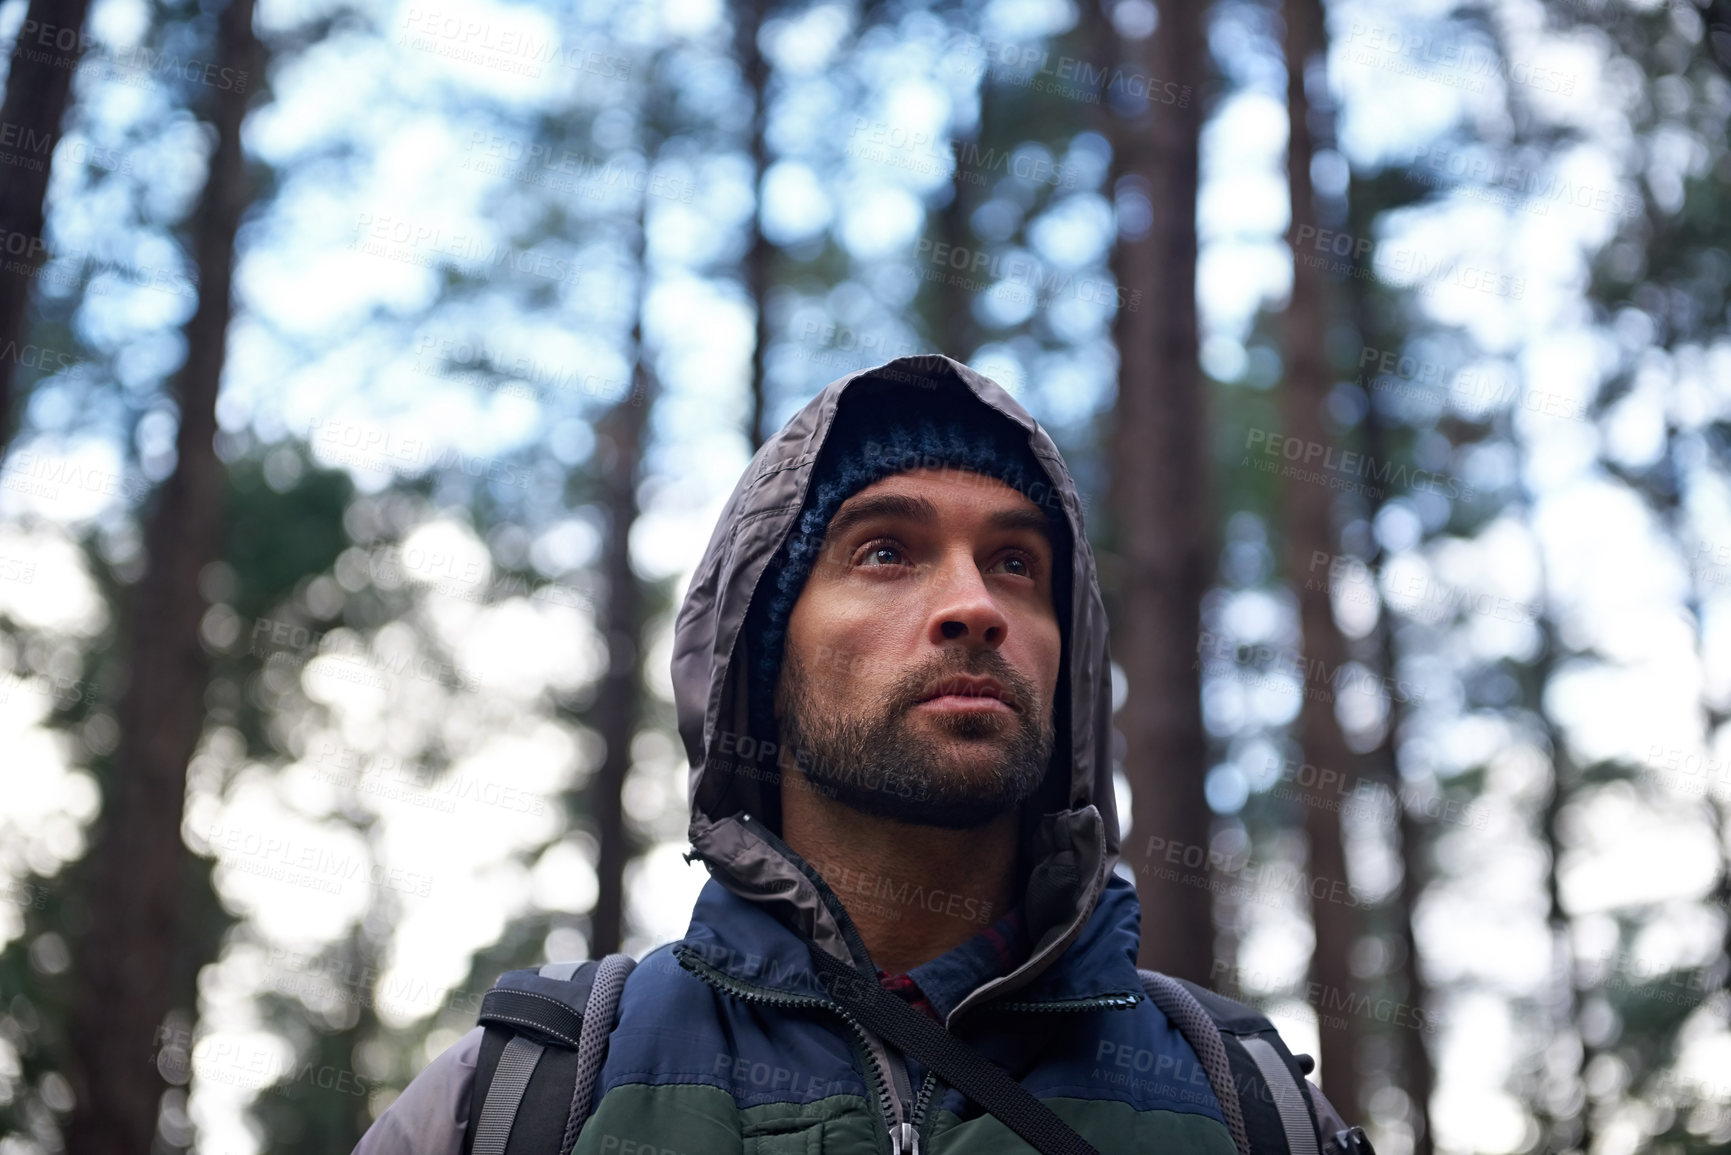 Buy stock photo Cropped shot of a handsome young man hiking in a forest